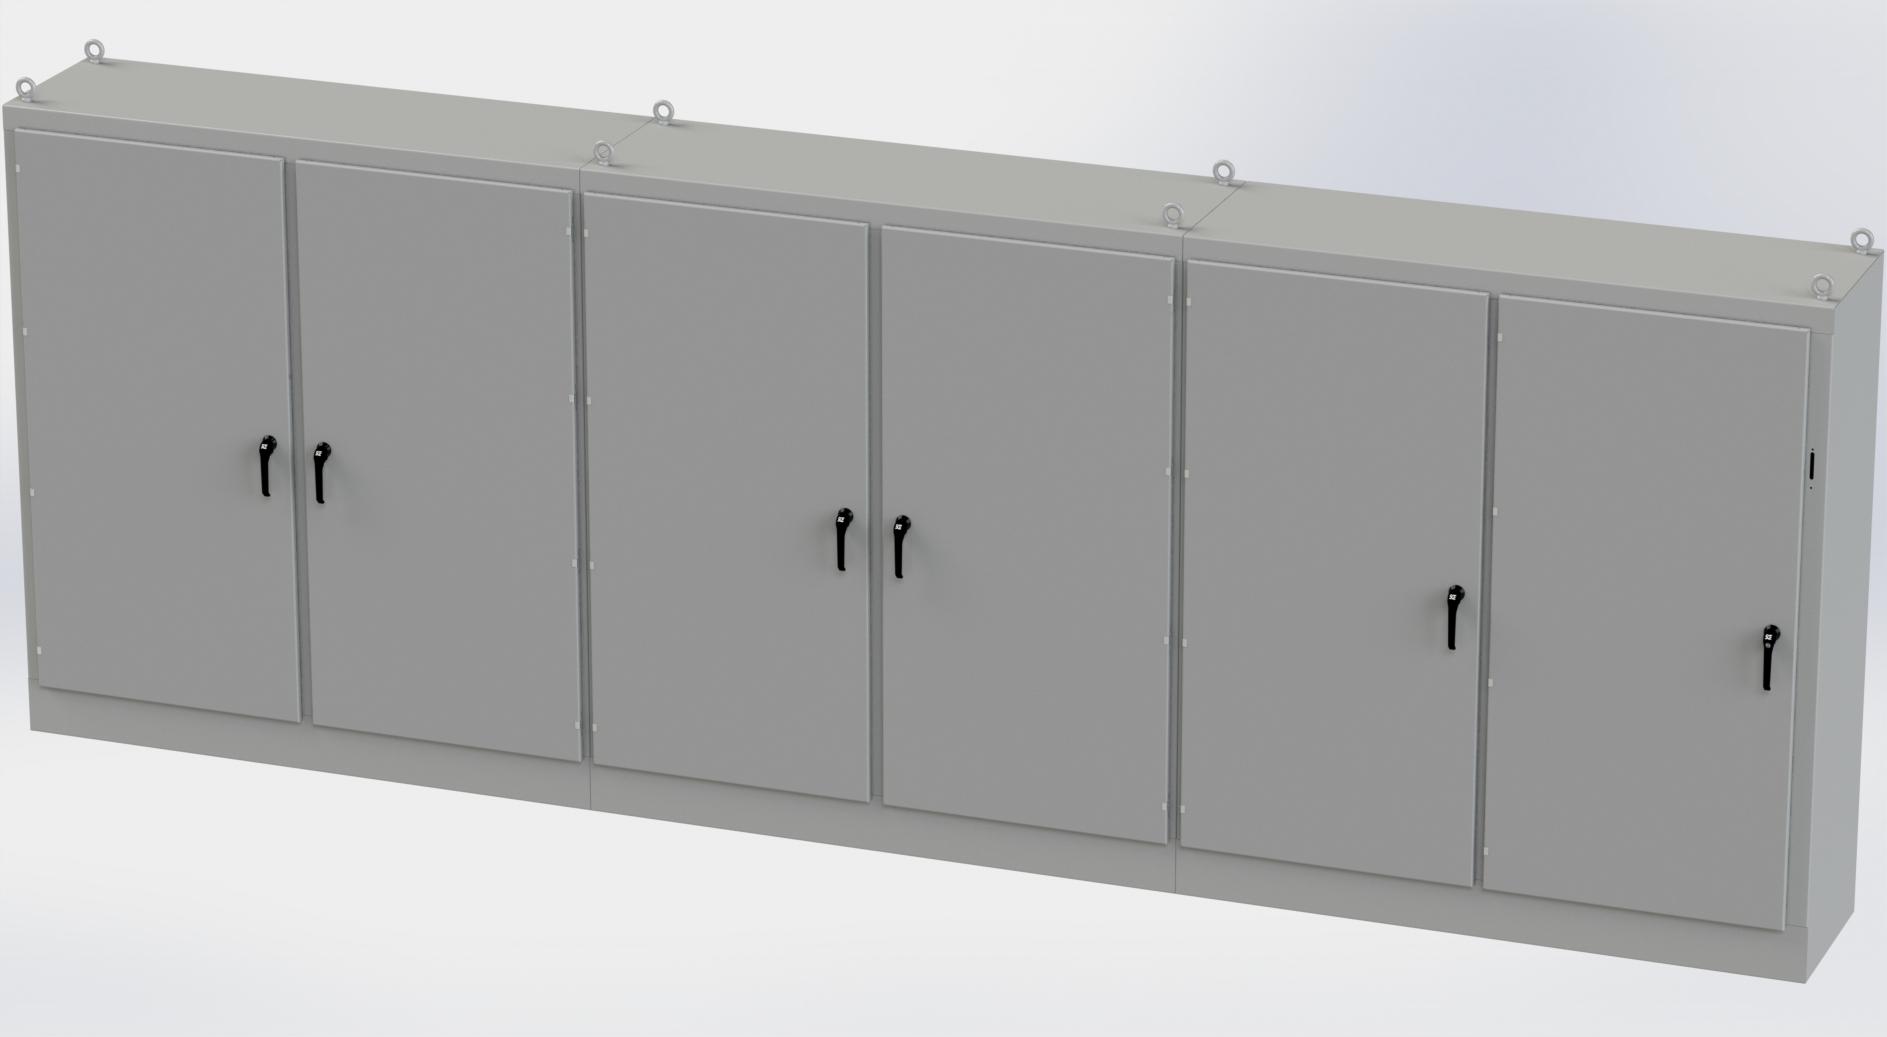 Saginaw Control SCE-84XM6EW24G 6DR XM Enclosure, Height:84.00", Width:235.00", Depth:24.00", ANSI-61 gray powder coating inside and out. Sub-panels are powder coated white.